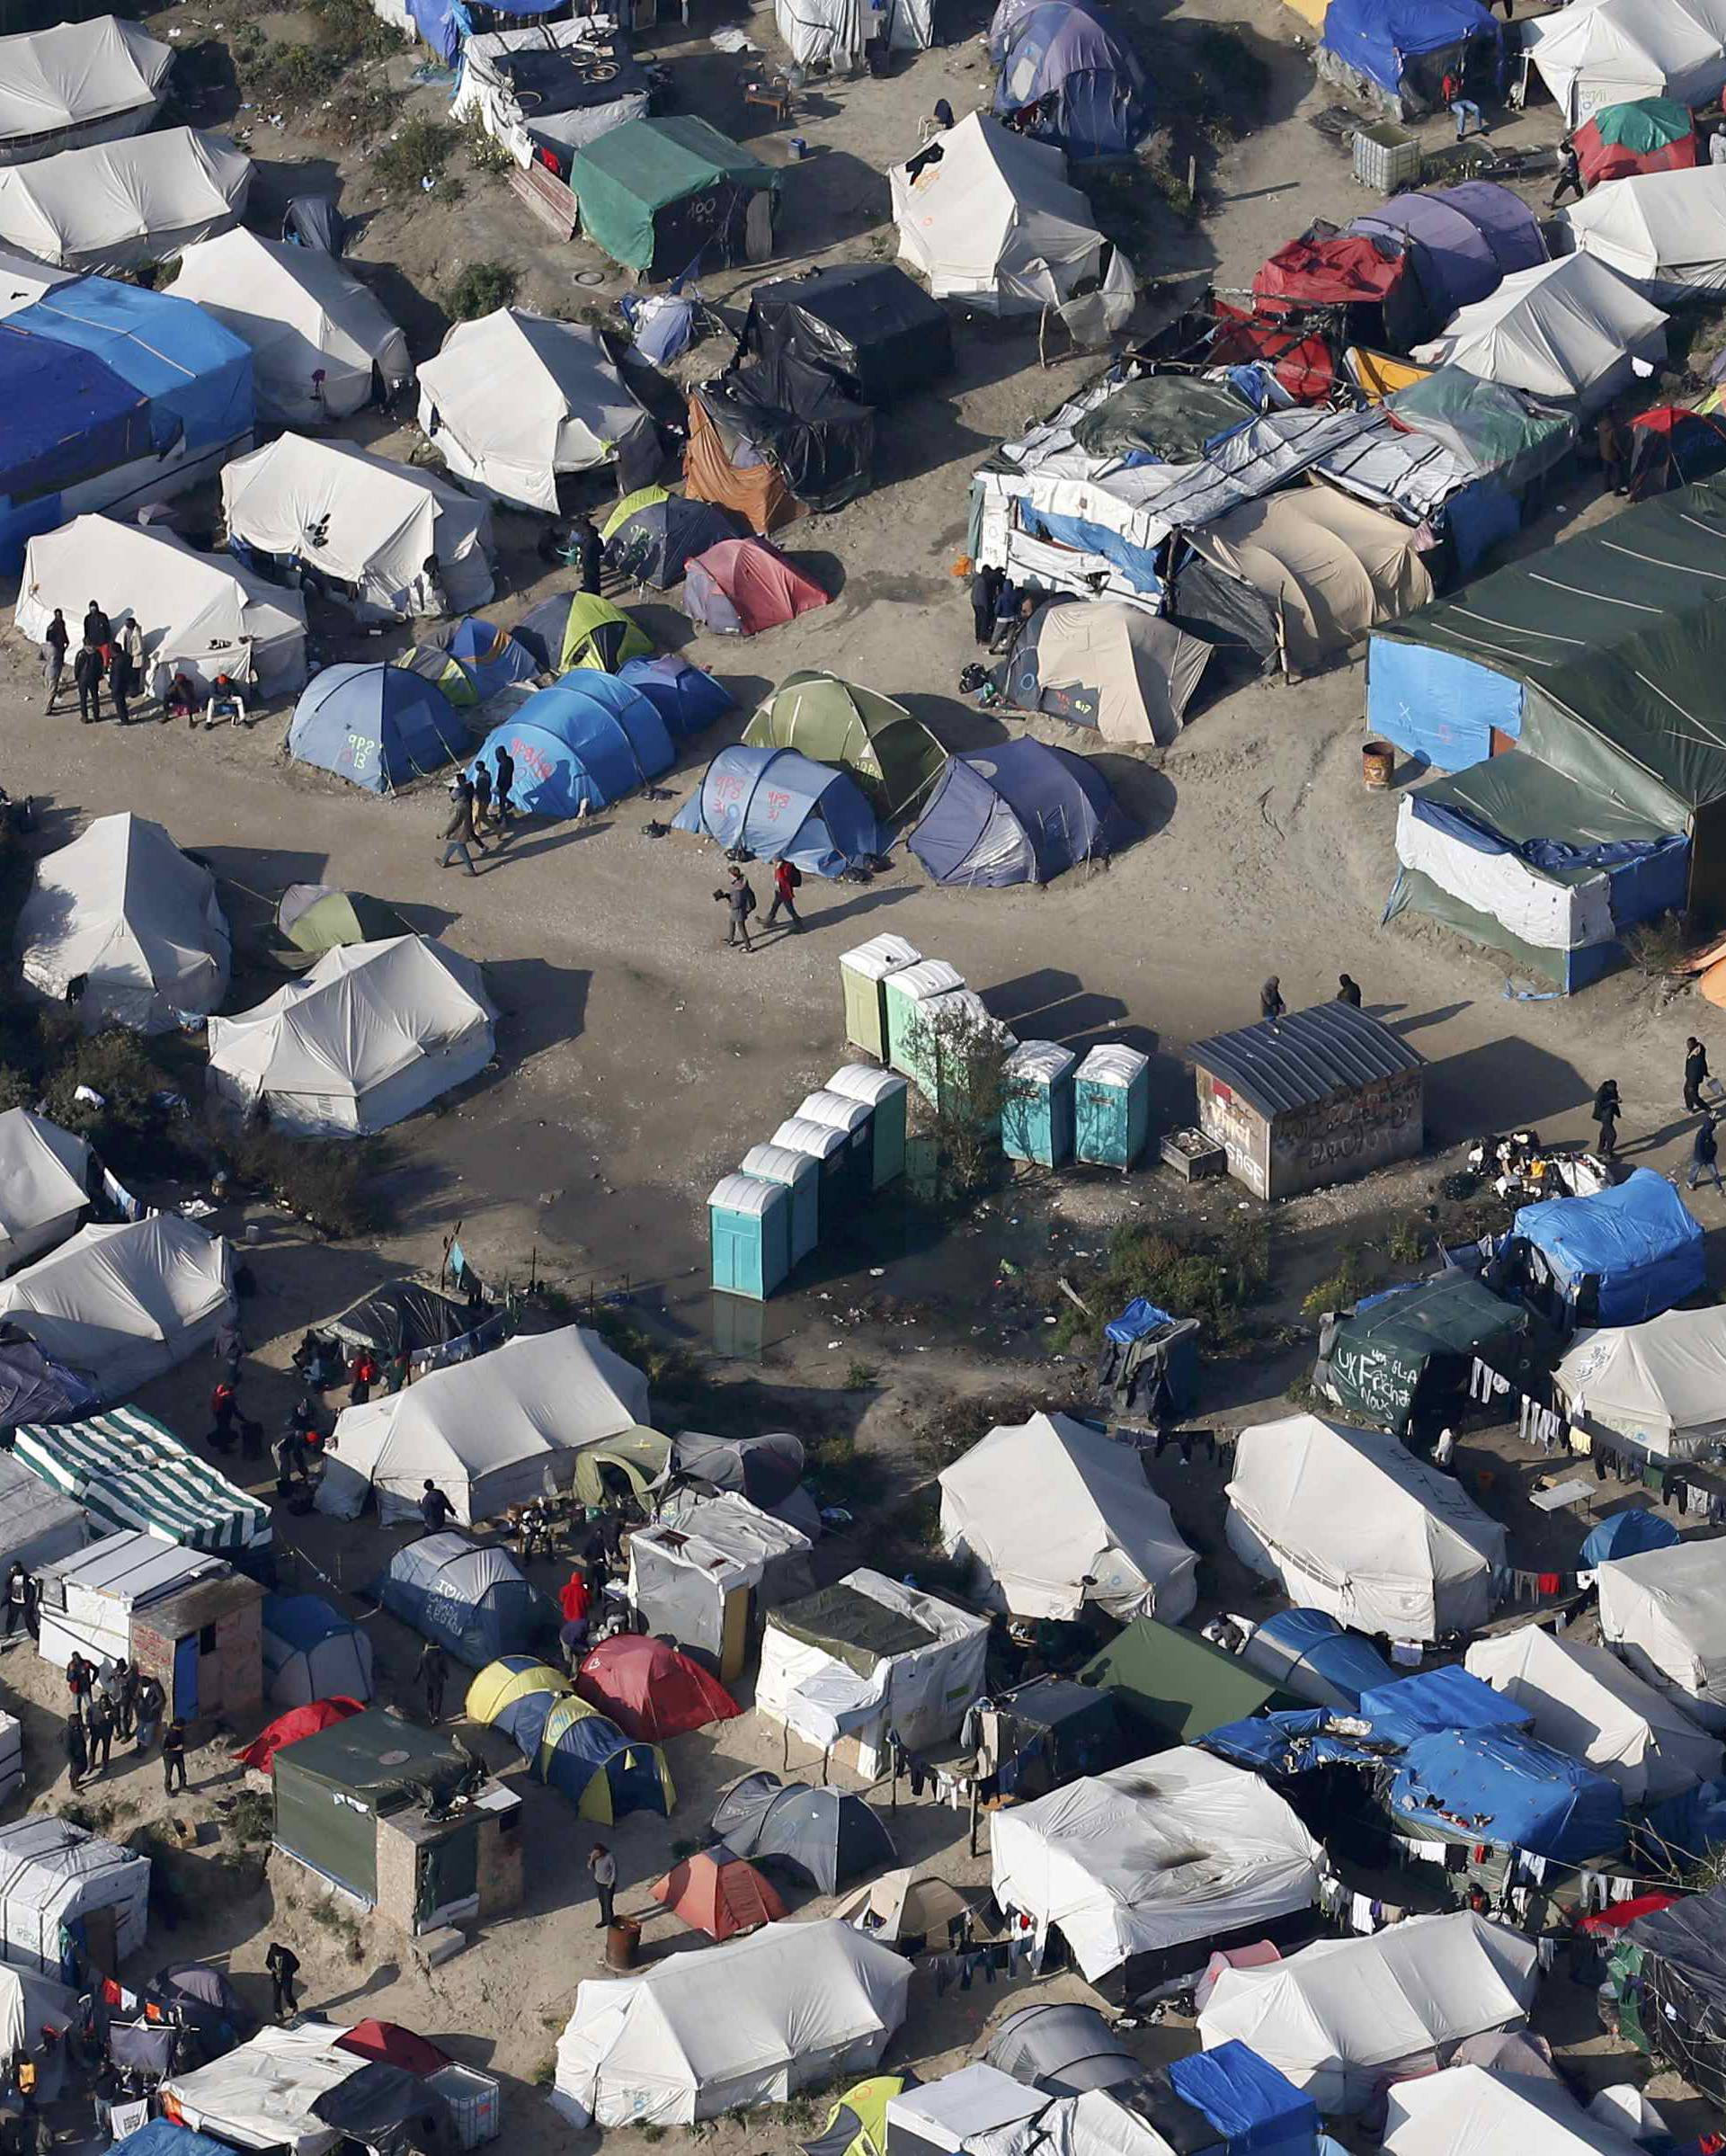 An aerial view shows tents and makeshift shelters on the eve of the evacuation and dismantlement of the camp called the "Jungle" in Calais